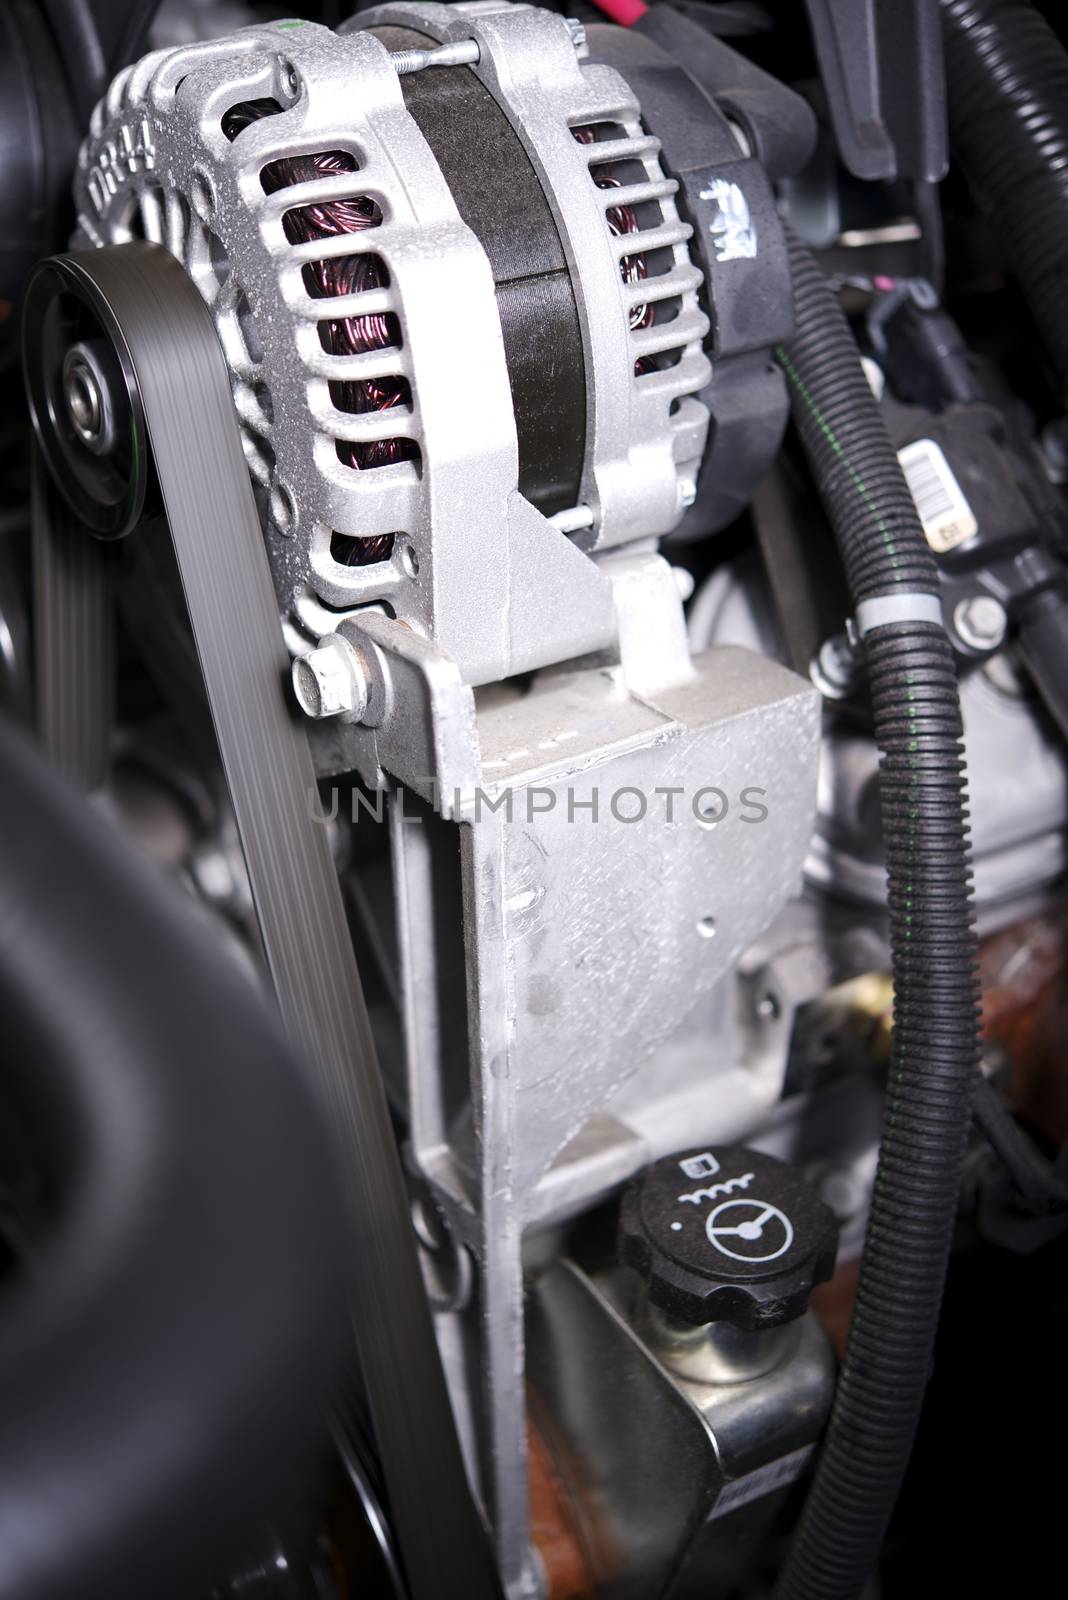 Alternator Elements in a Car by welcomia